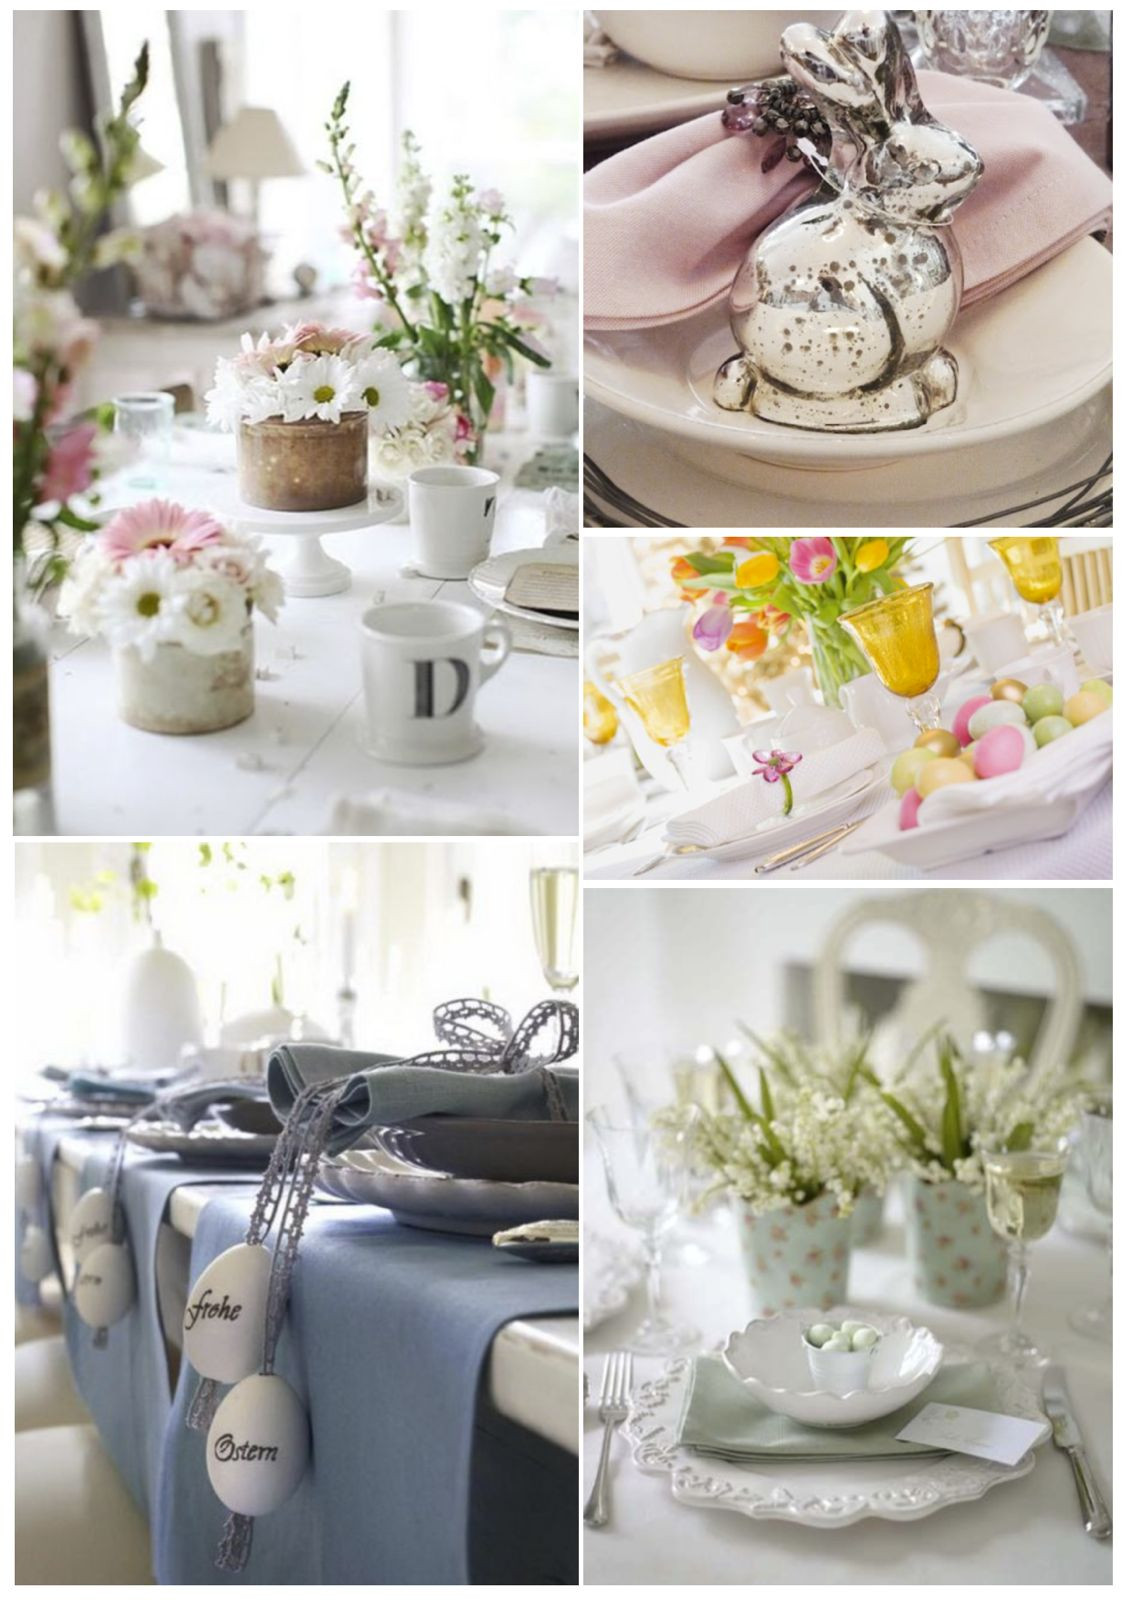 Easter Table Setting Ideas
 Inspiration 22 Easter Table Setting Ideas Style Barista